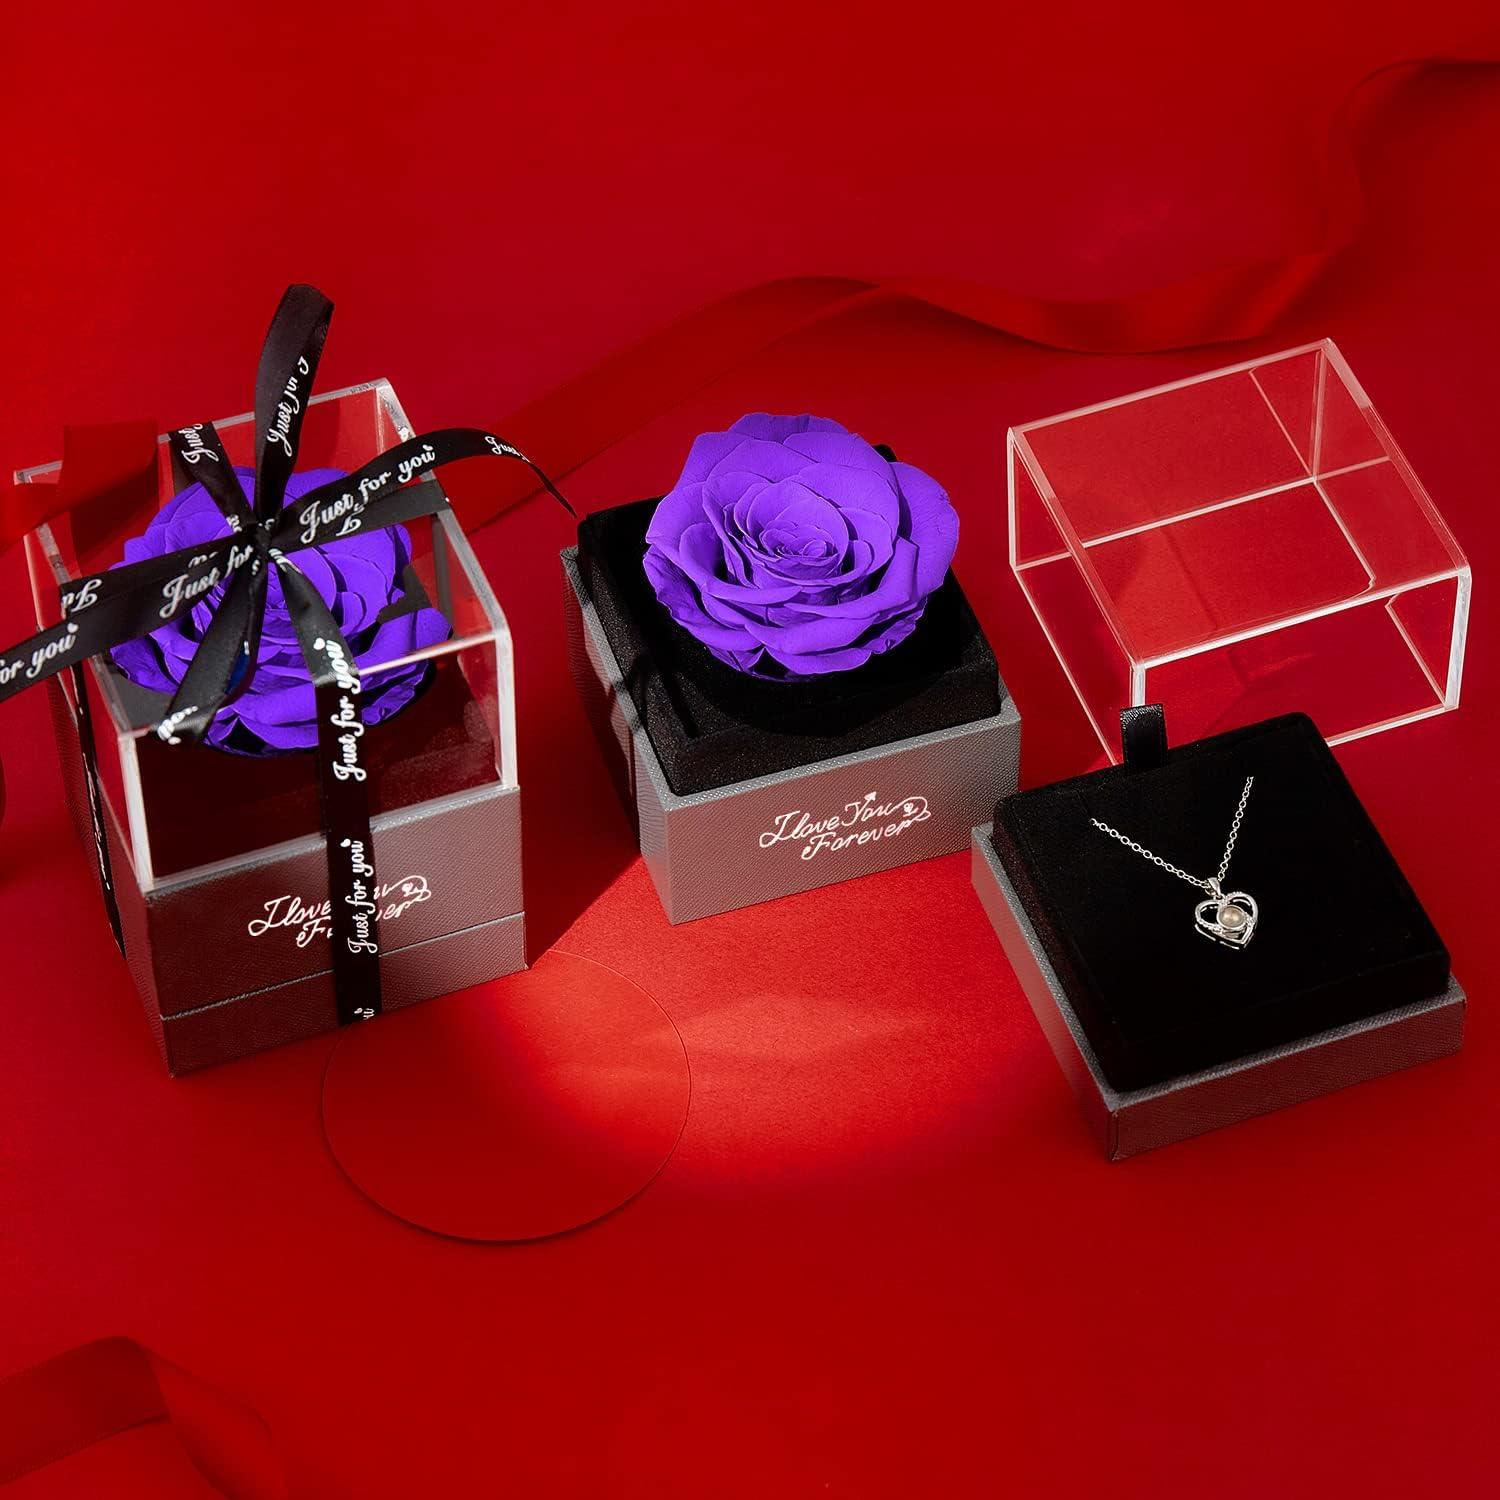 Preserved Red Real Rose with I Love You Necklace -Eternal Flowers Rose Gifts for Mom Wife - Decotree.co Online Shop